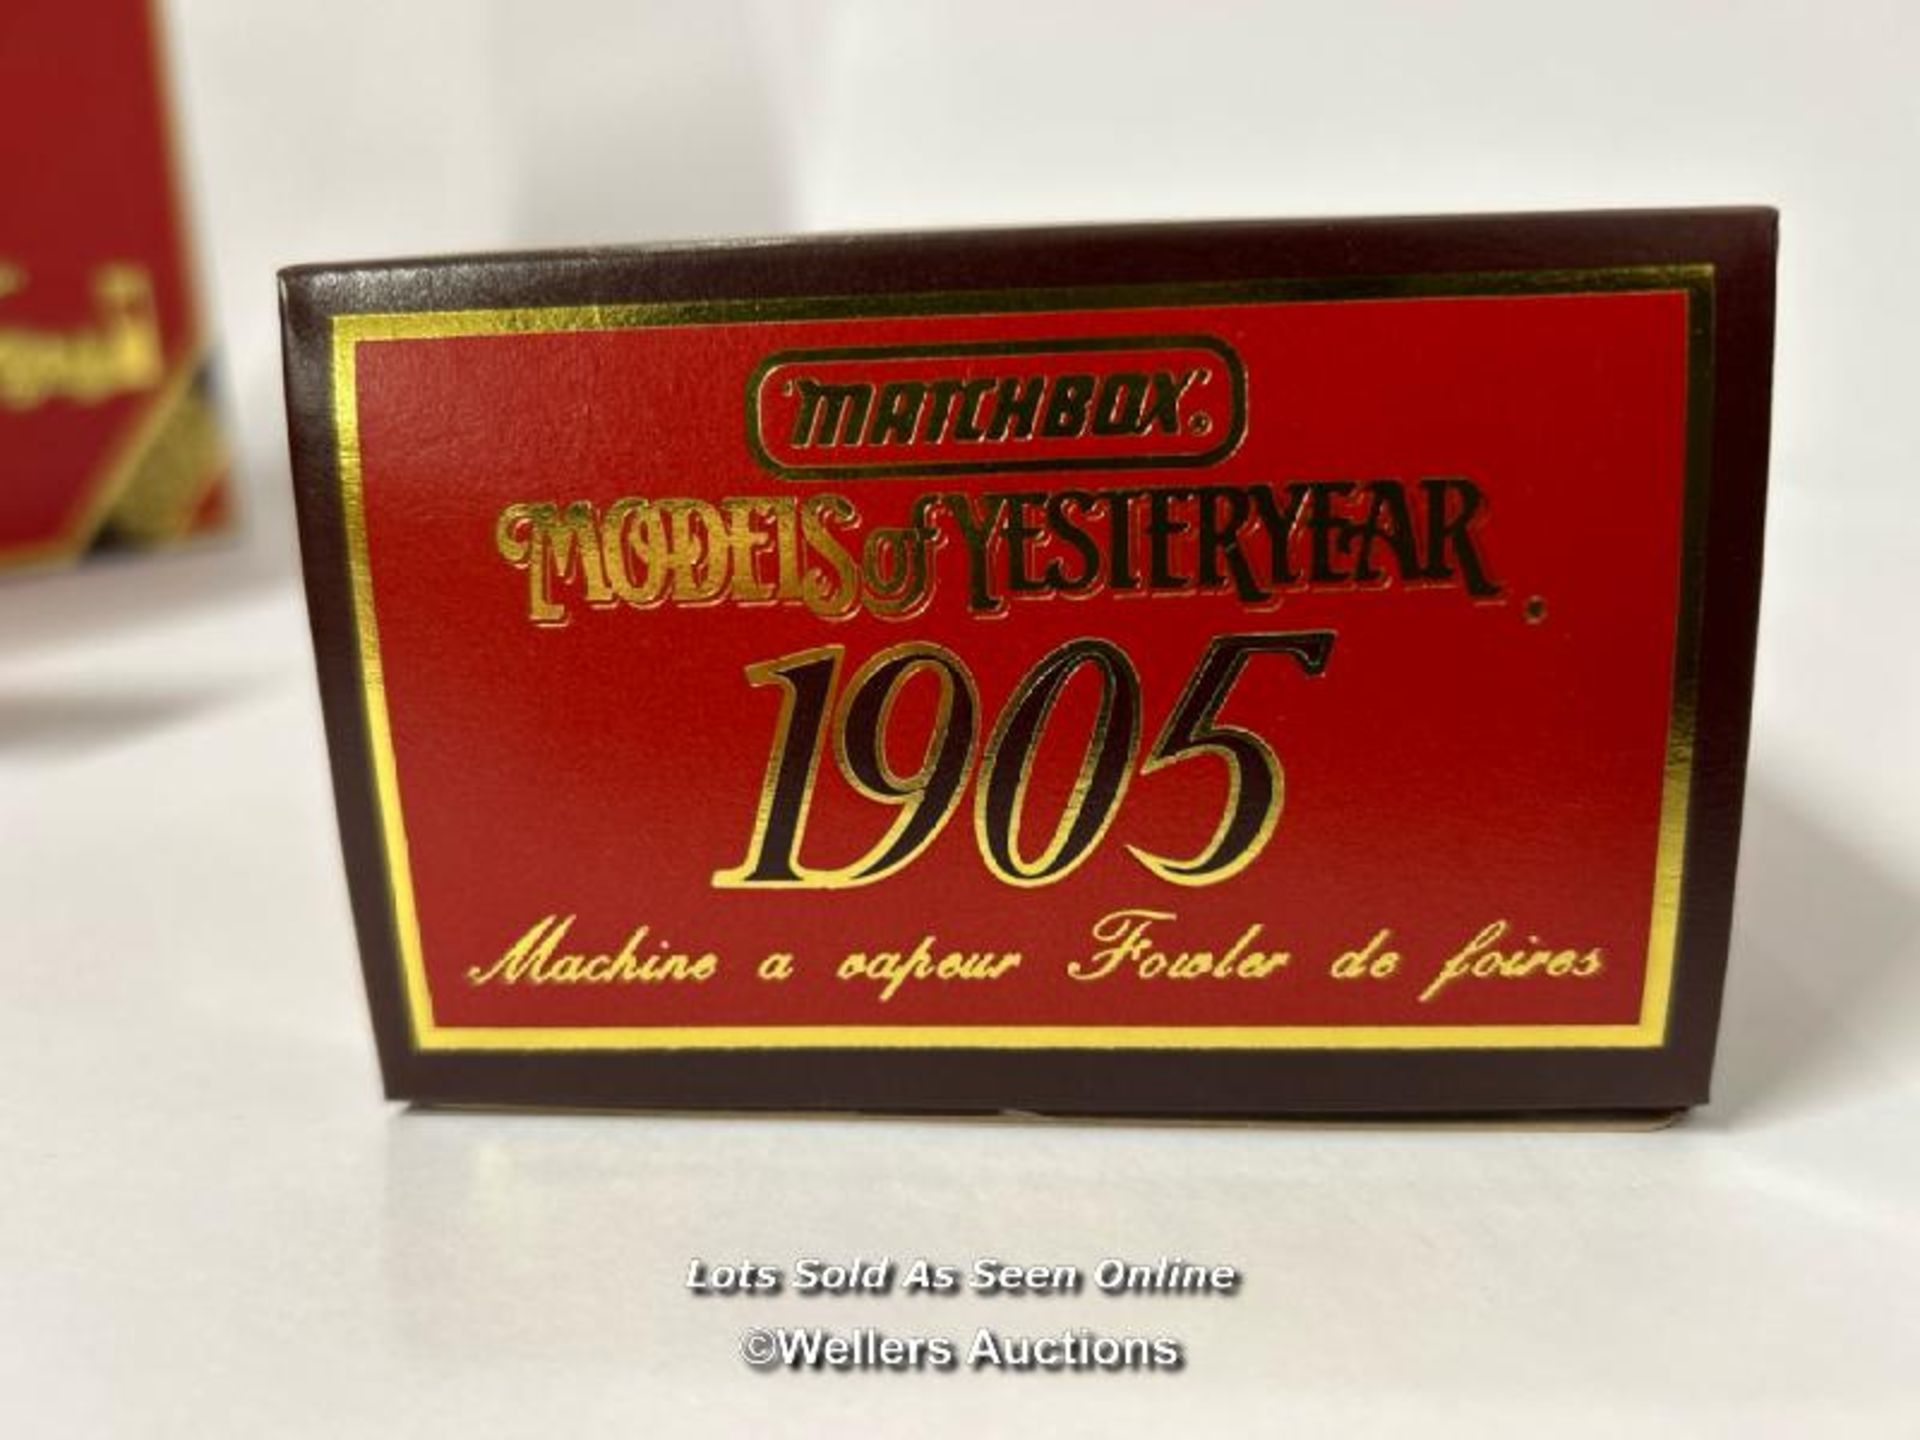 Matchbox Models of Yesteryear 1905 Fowler Showman's Engine Y19, rare limited edition boxed /AN12 - Image 3 of 4